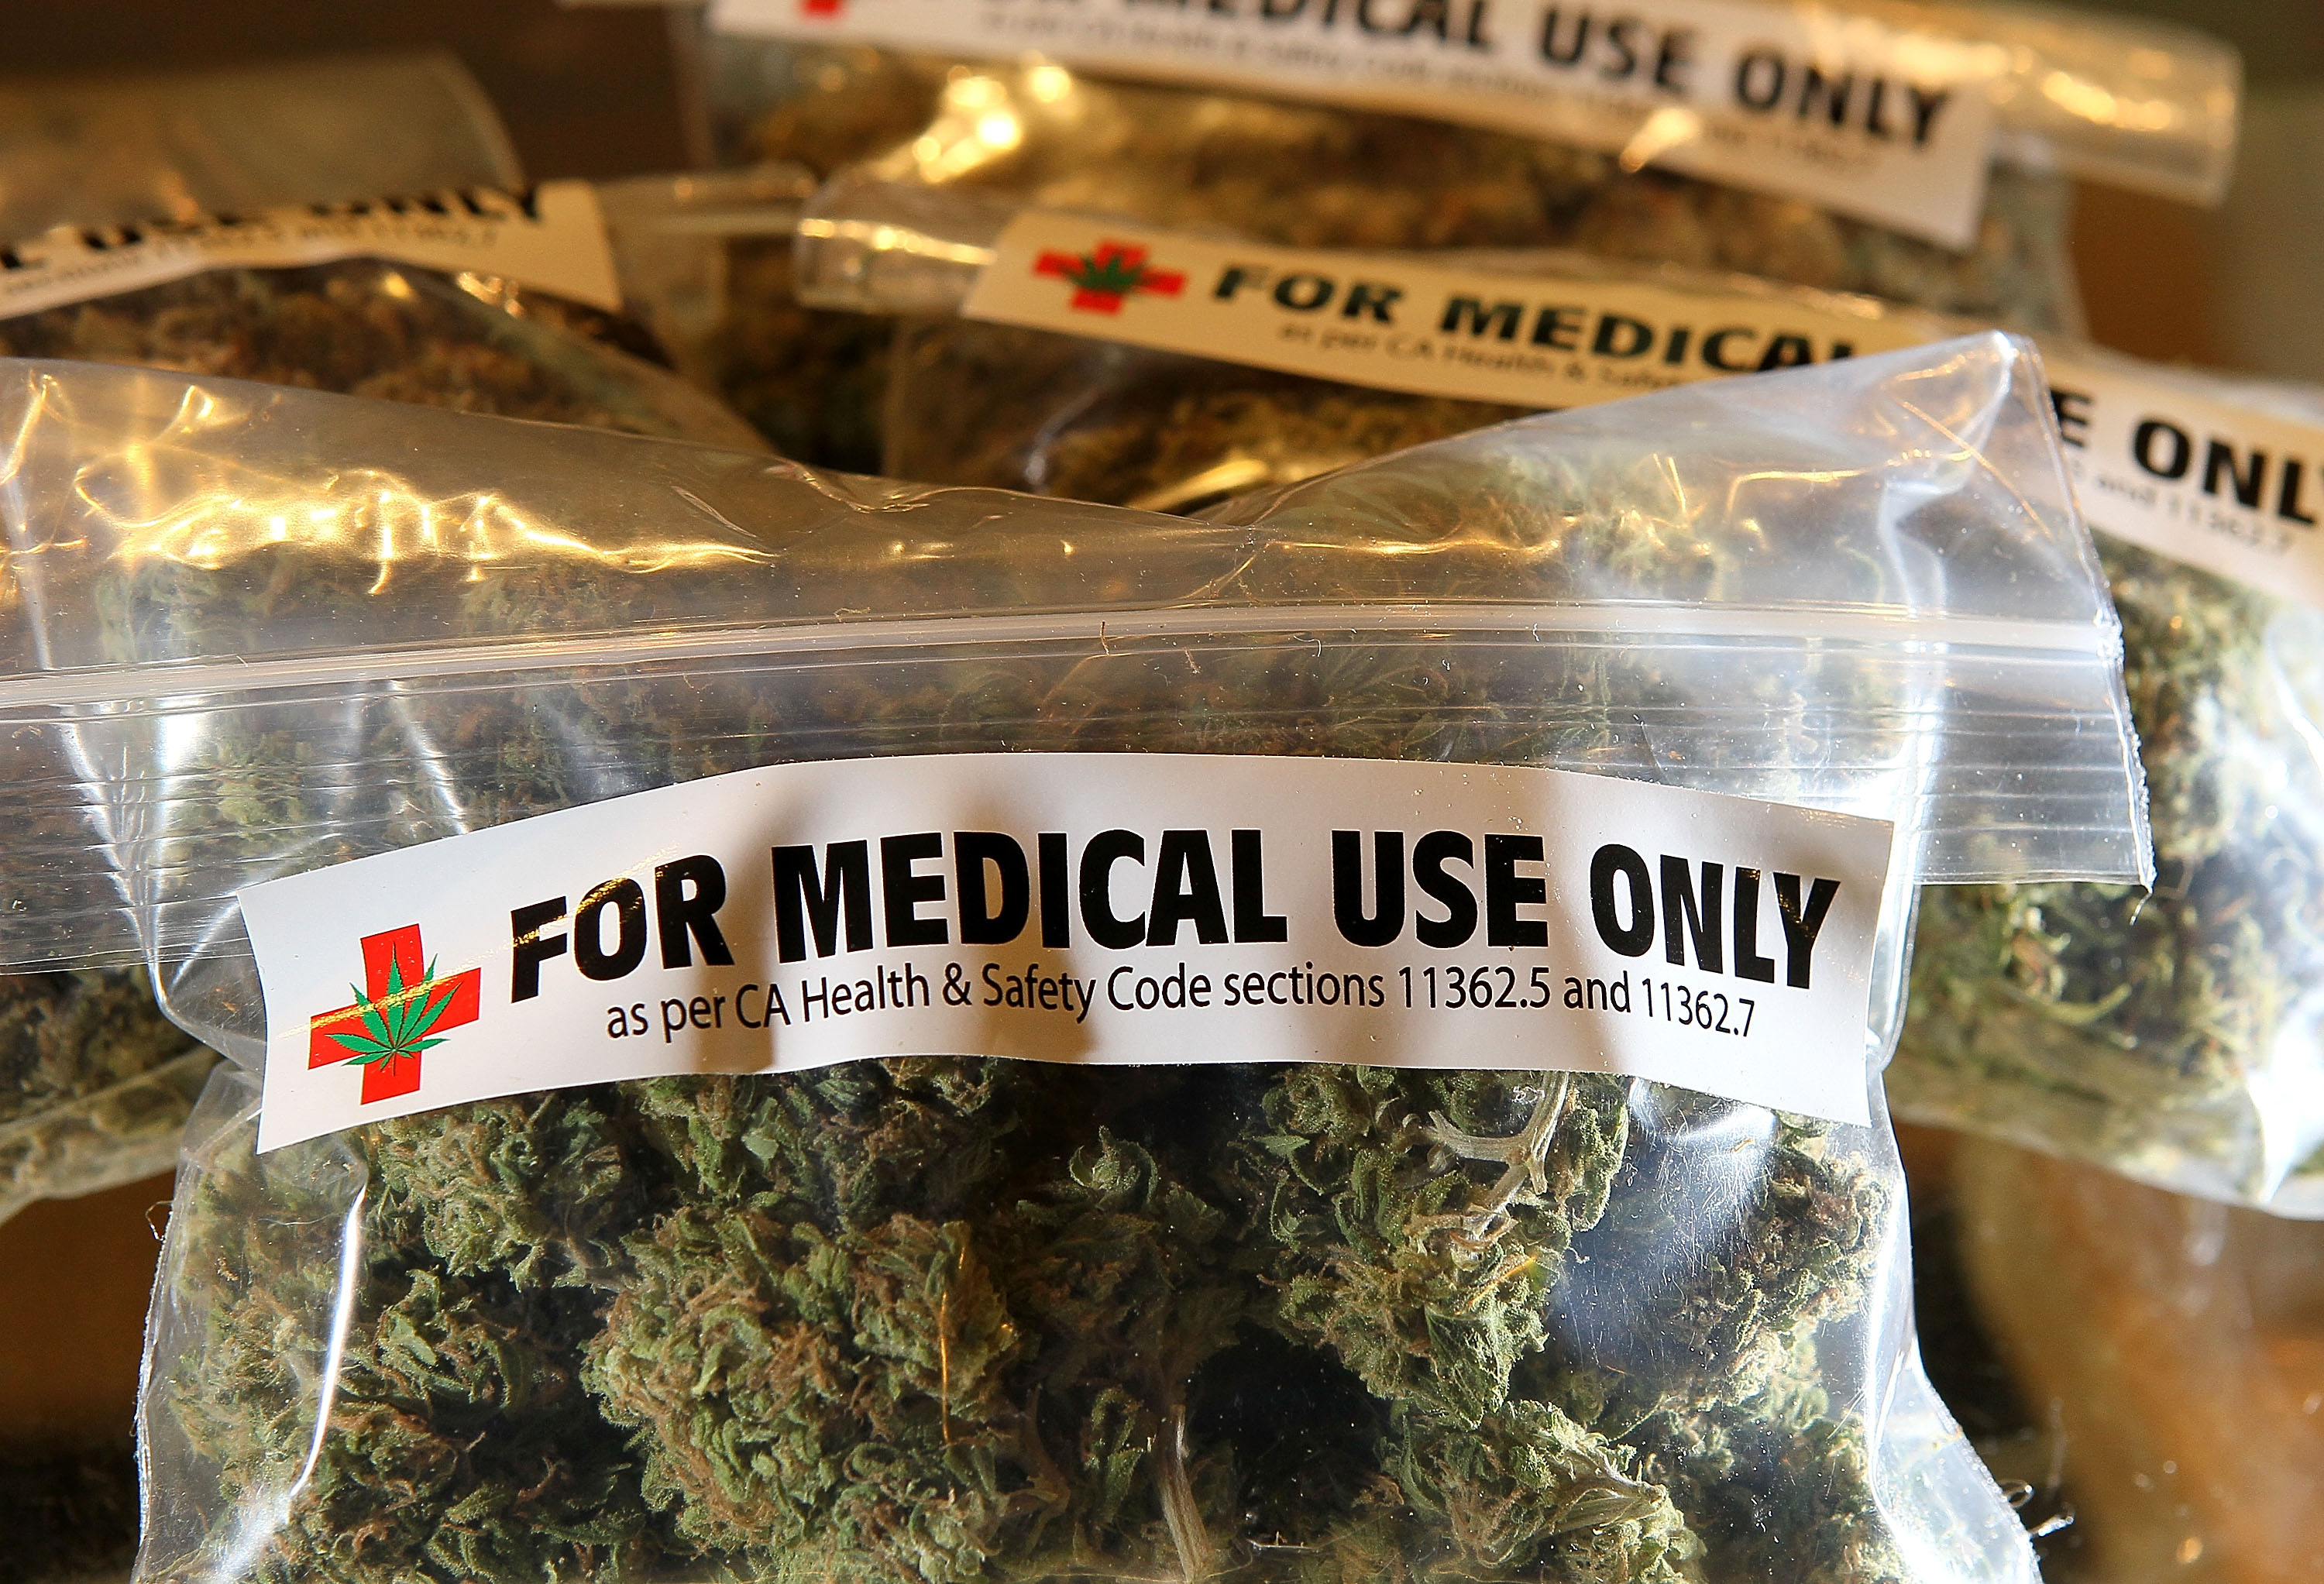 One-ounce bags of medicinal marijuana are displayed at the Berkeley Patients Group March 25, 2010 in Berkeley, California. (Justin Sullivan—Getty Images)